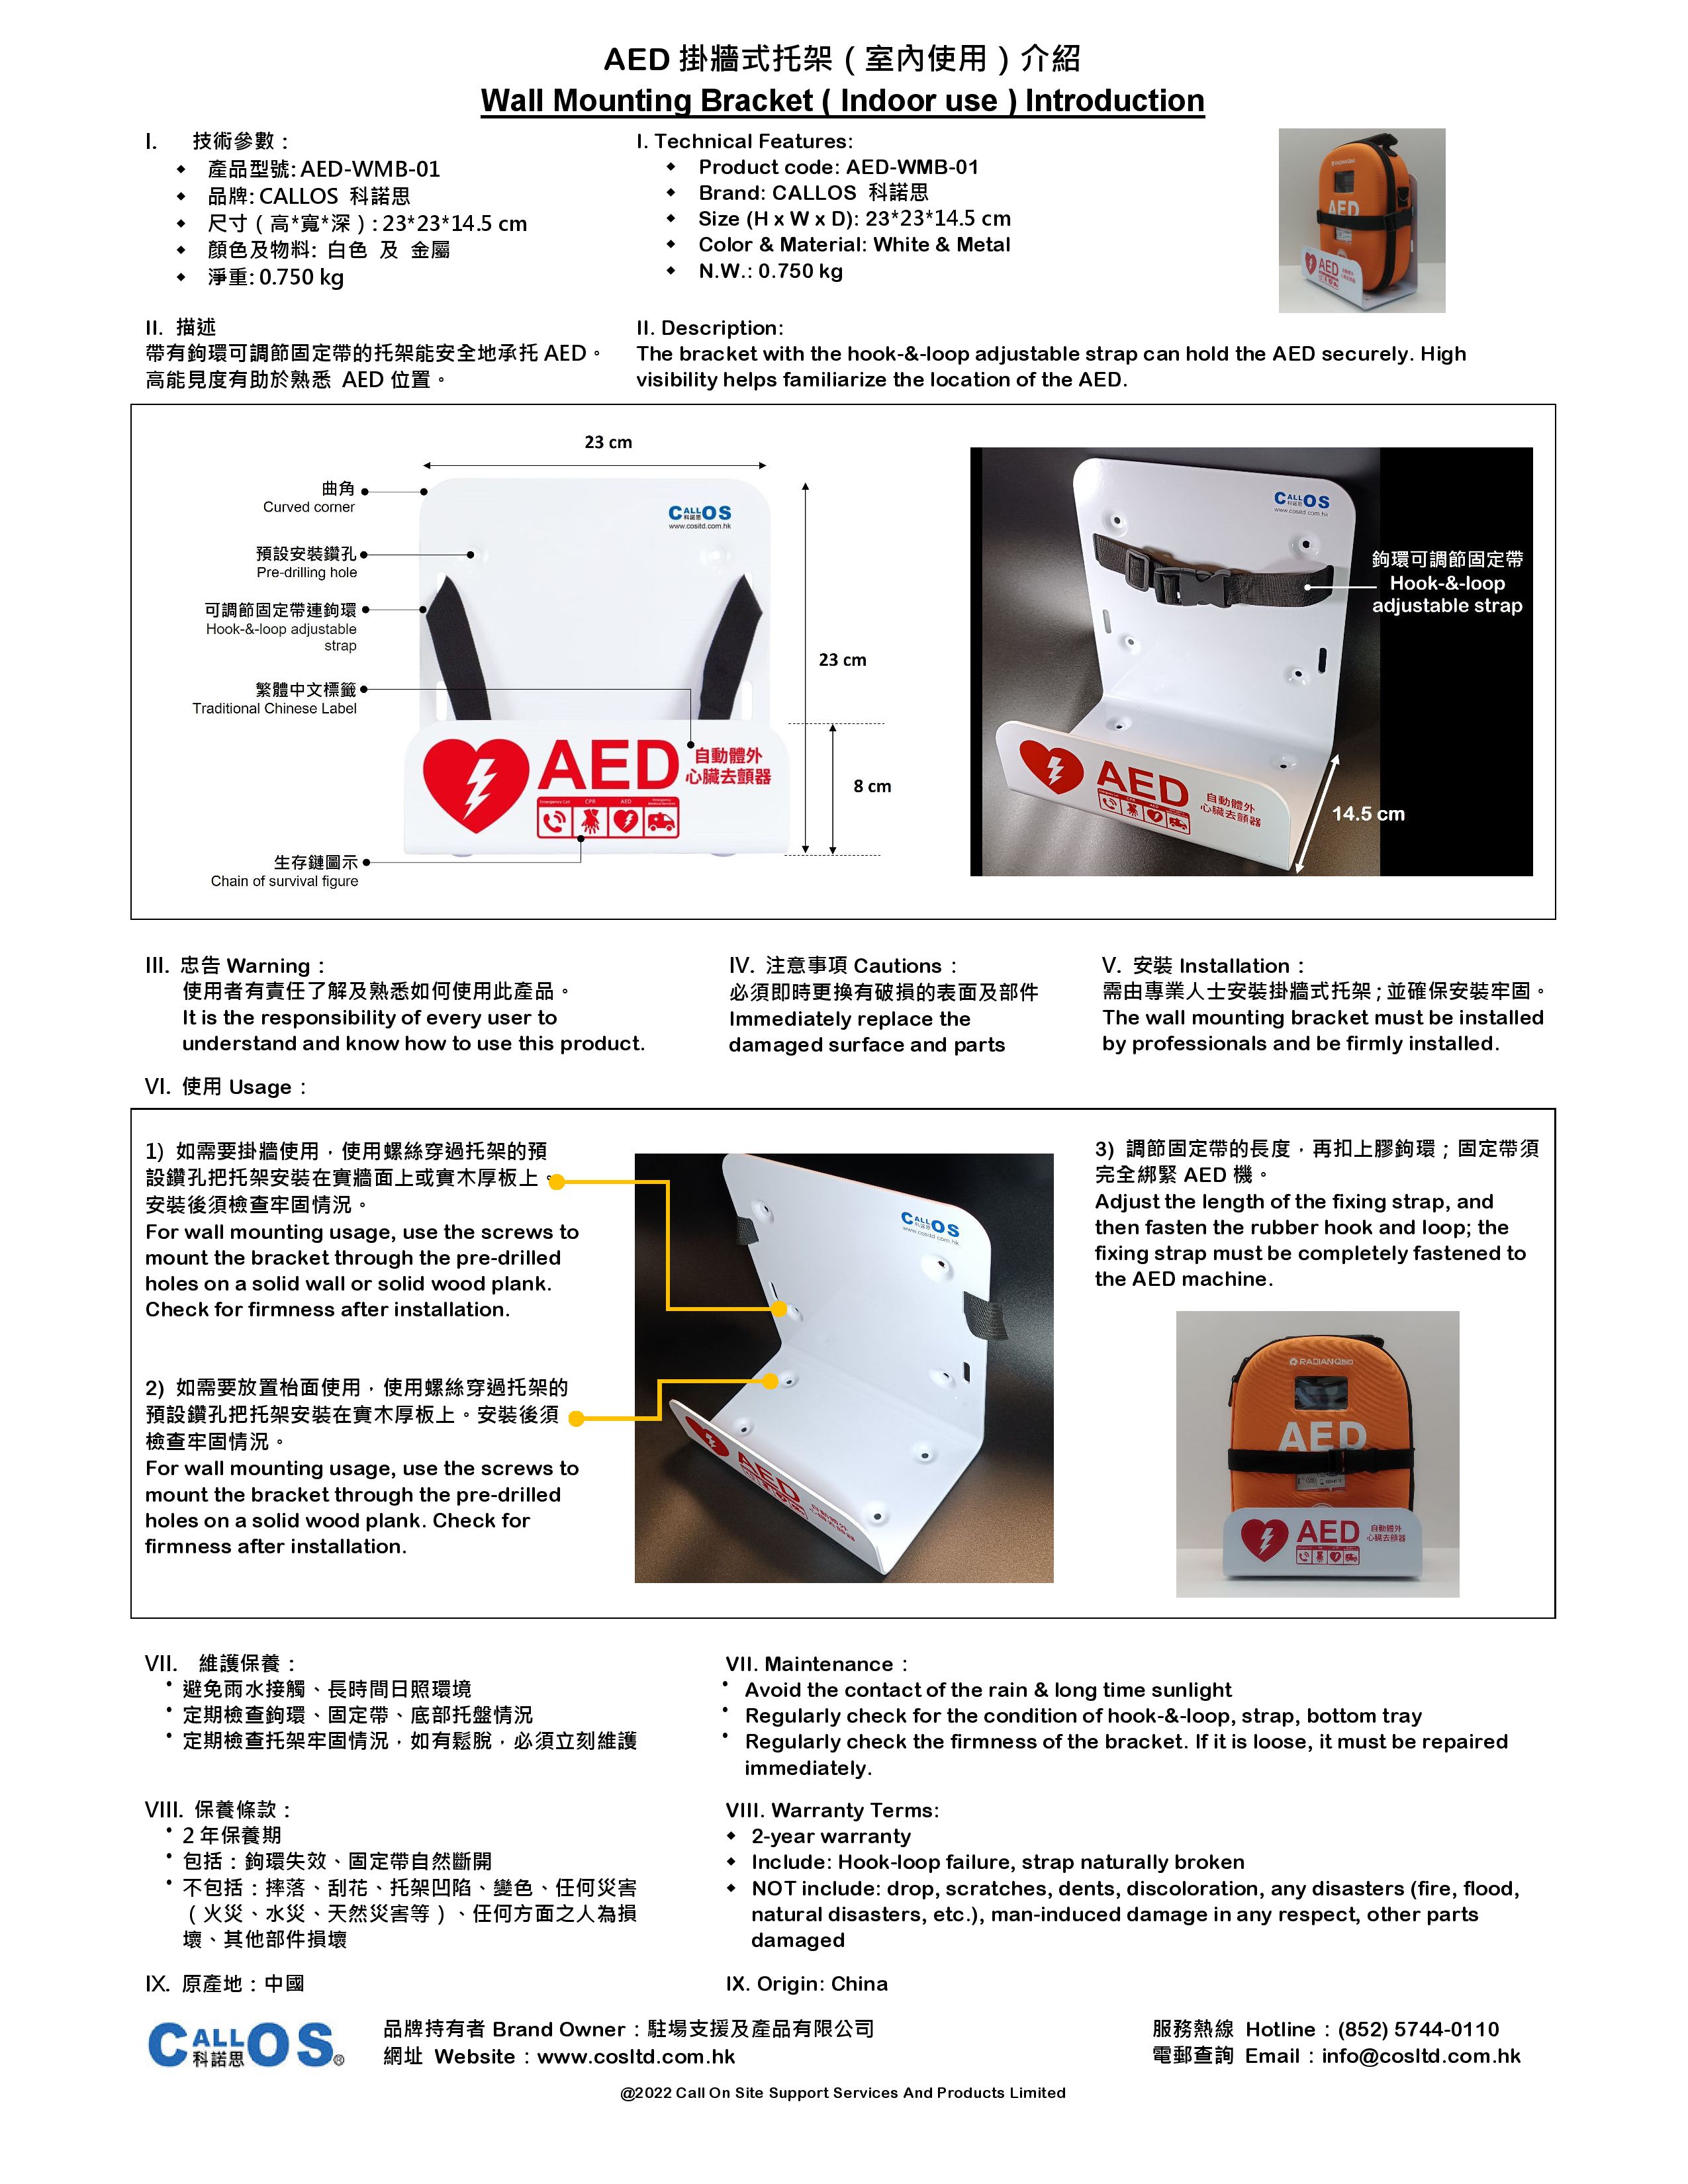 AED Wall Mounting Bracket